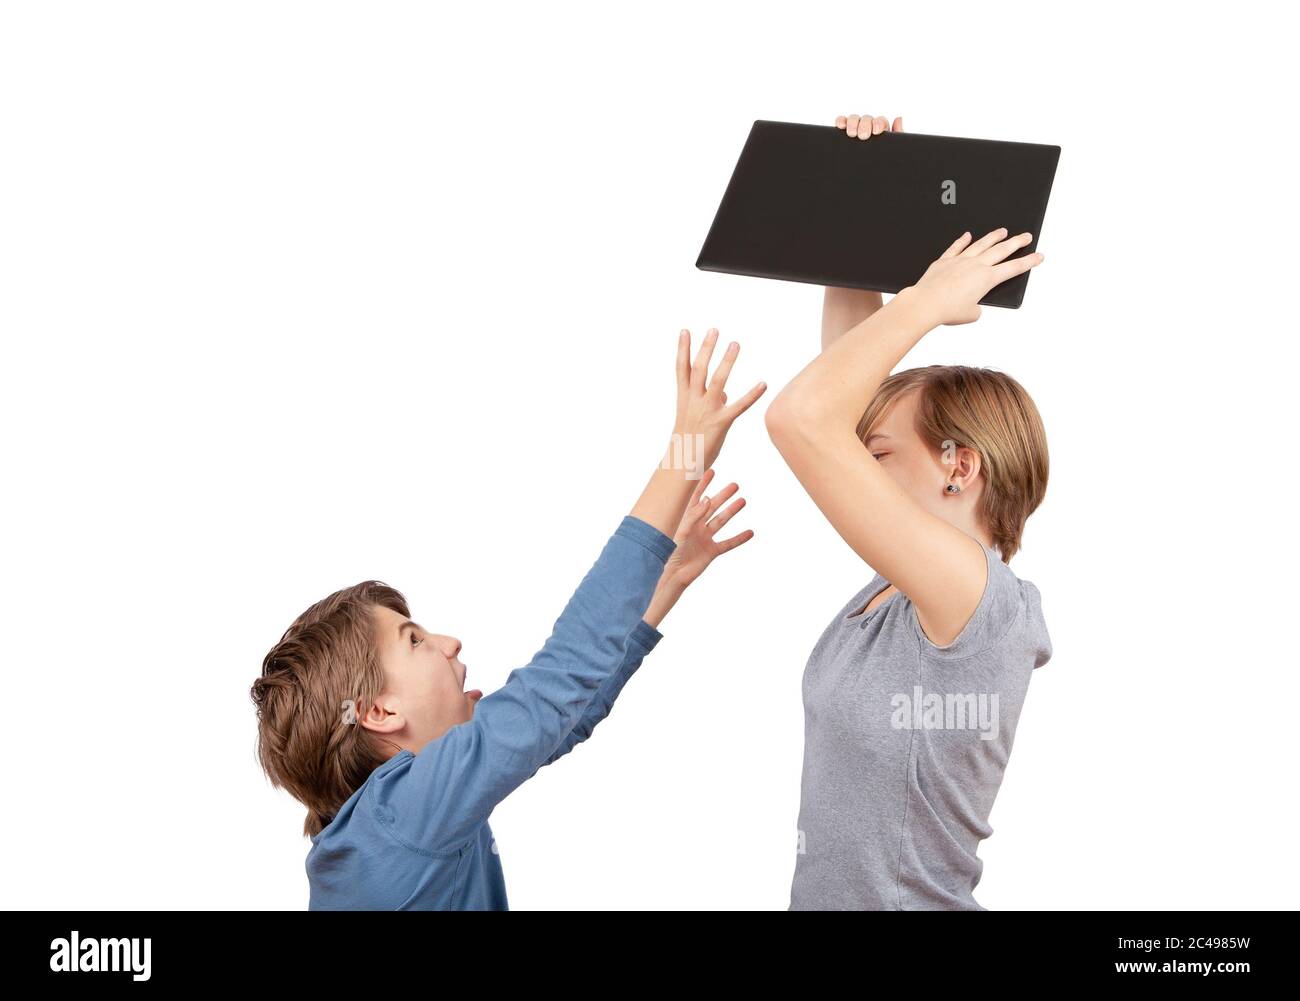 Siblings fighting for the laptop. The broher wants  the notebook, his sister holding it above her head.. Studio shot isolated on white. Stock Photo